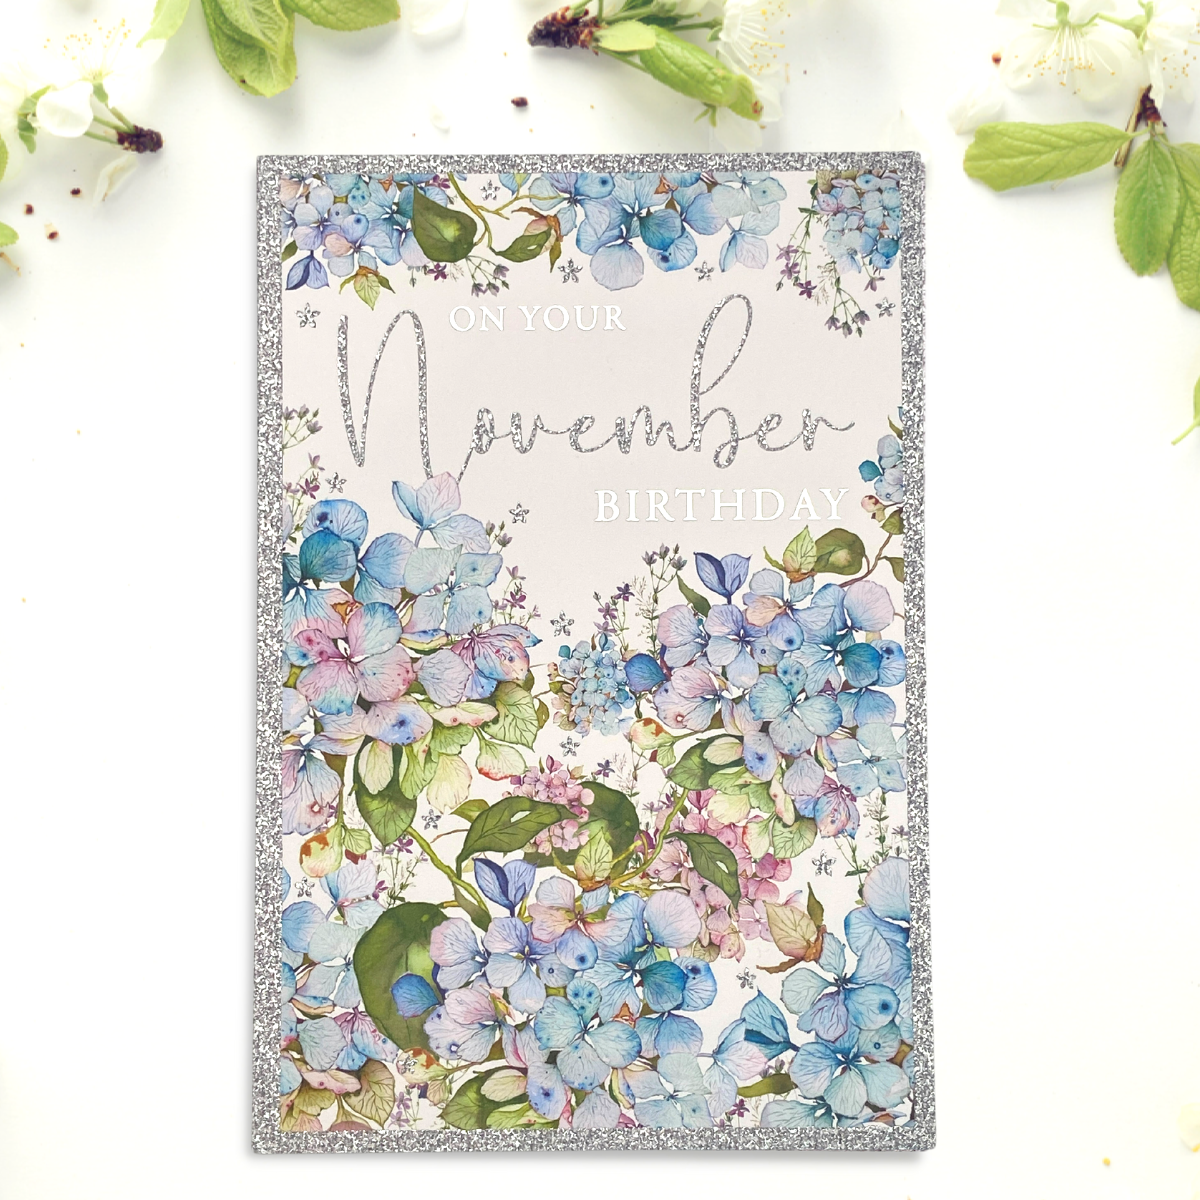 Front image of November birthday card featuring blue hydrangeas and glitter border